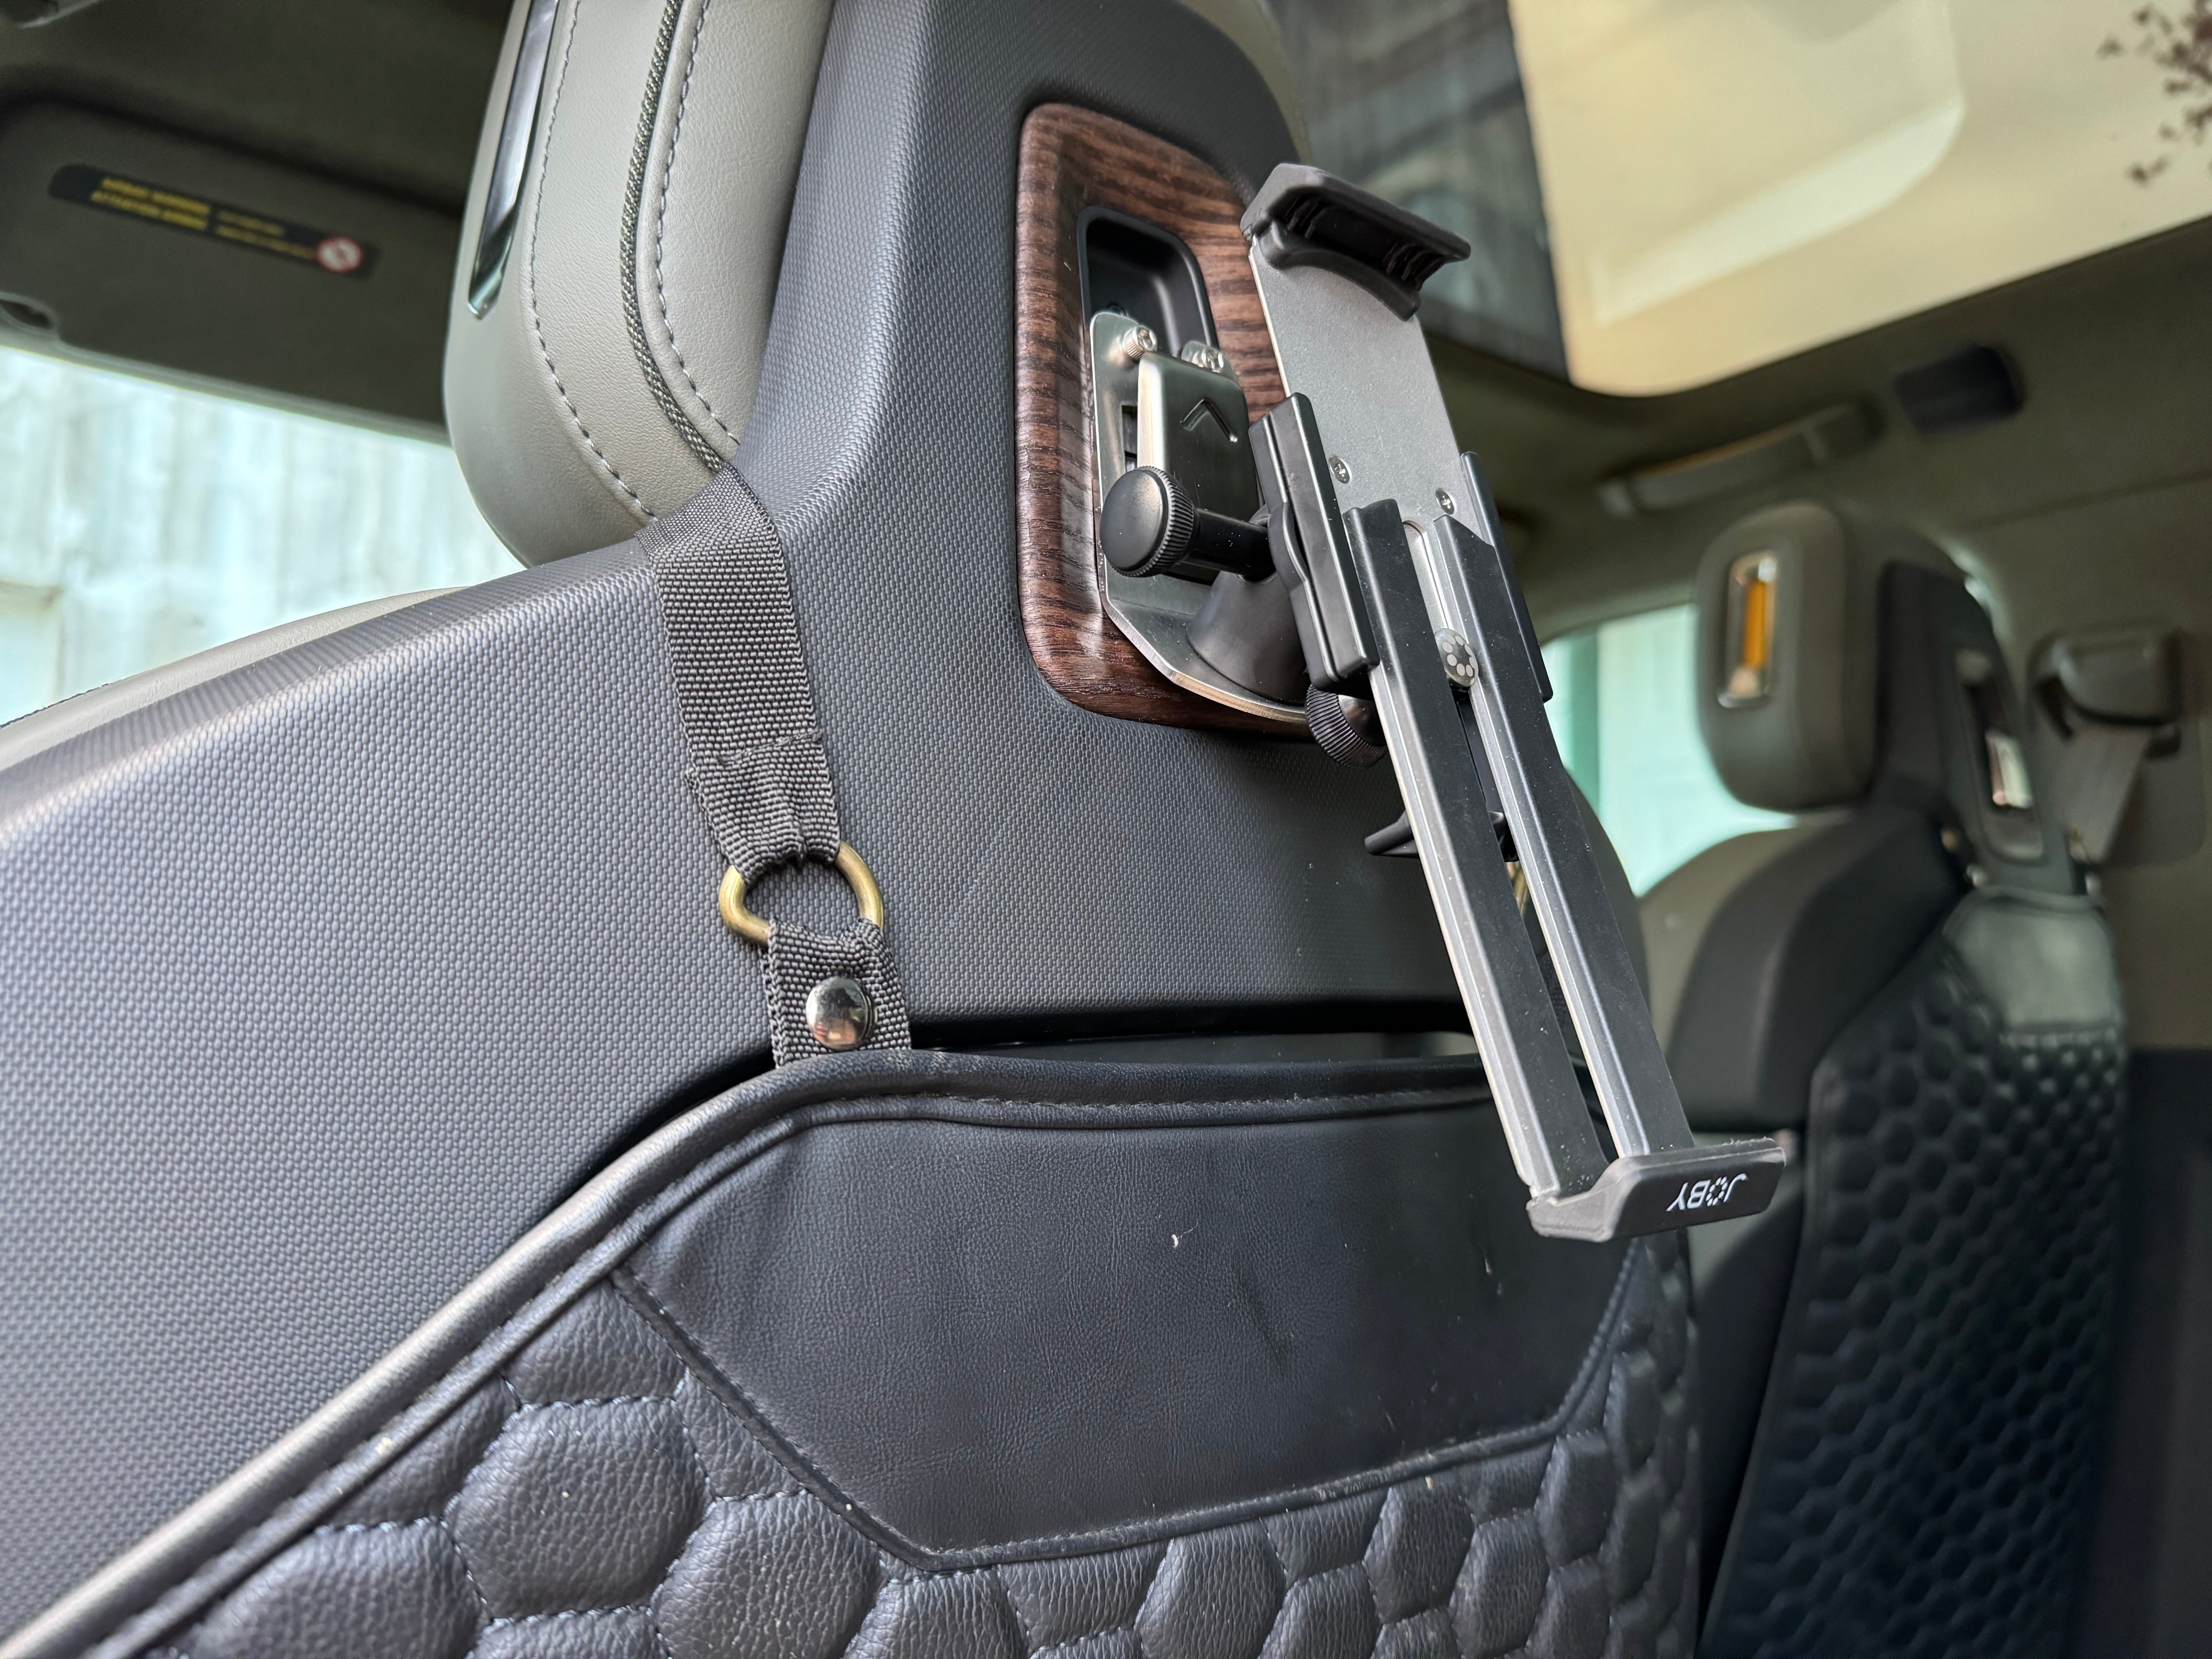 Universal Seat Back Mount for Rivian R1T and R1S (iPad mount not included)